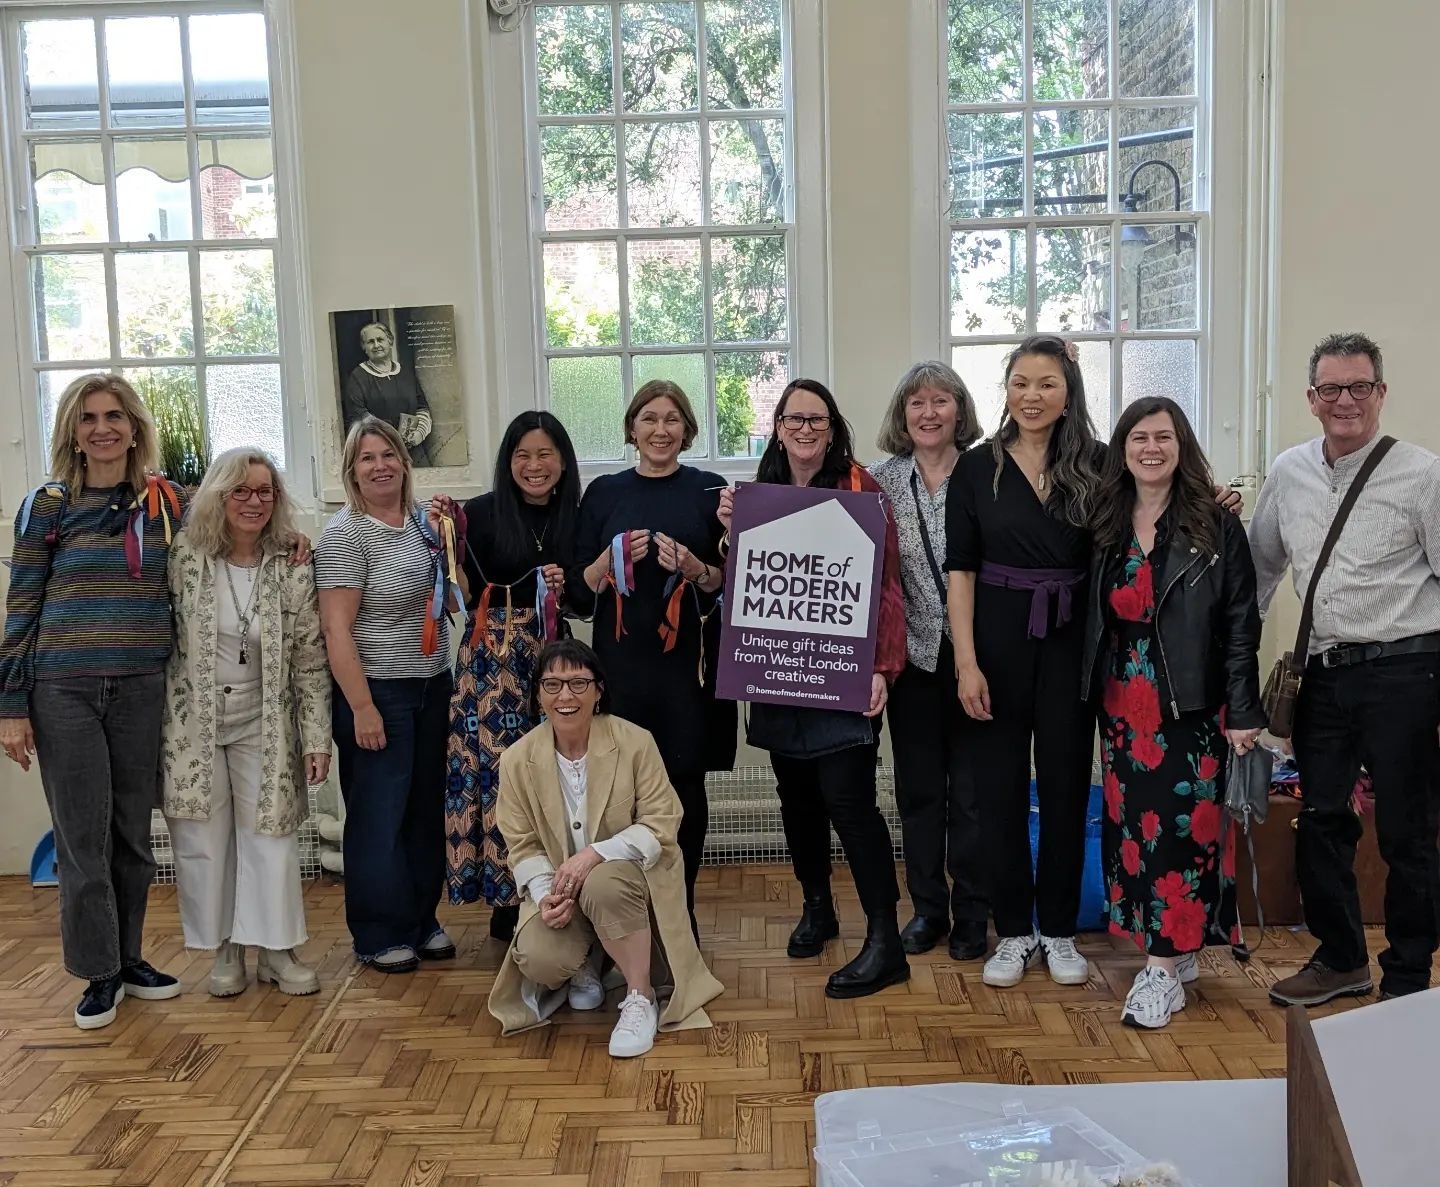 I had a wonderful day catching up with the @homeofmodernmakers team today in Kew! Thank you for organising such a lovely event and working so hard to publicise it. I look forward to the next one x

#HomeOfModernMakers #KewVillage #JinnyNguiDesign